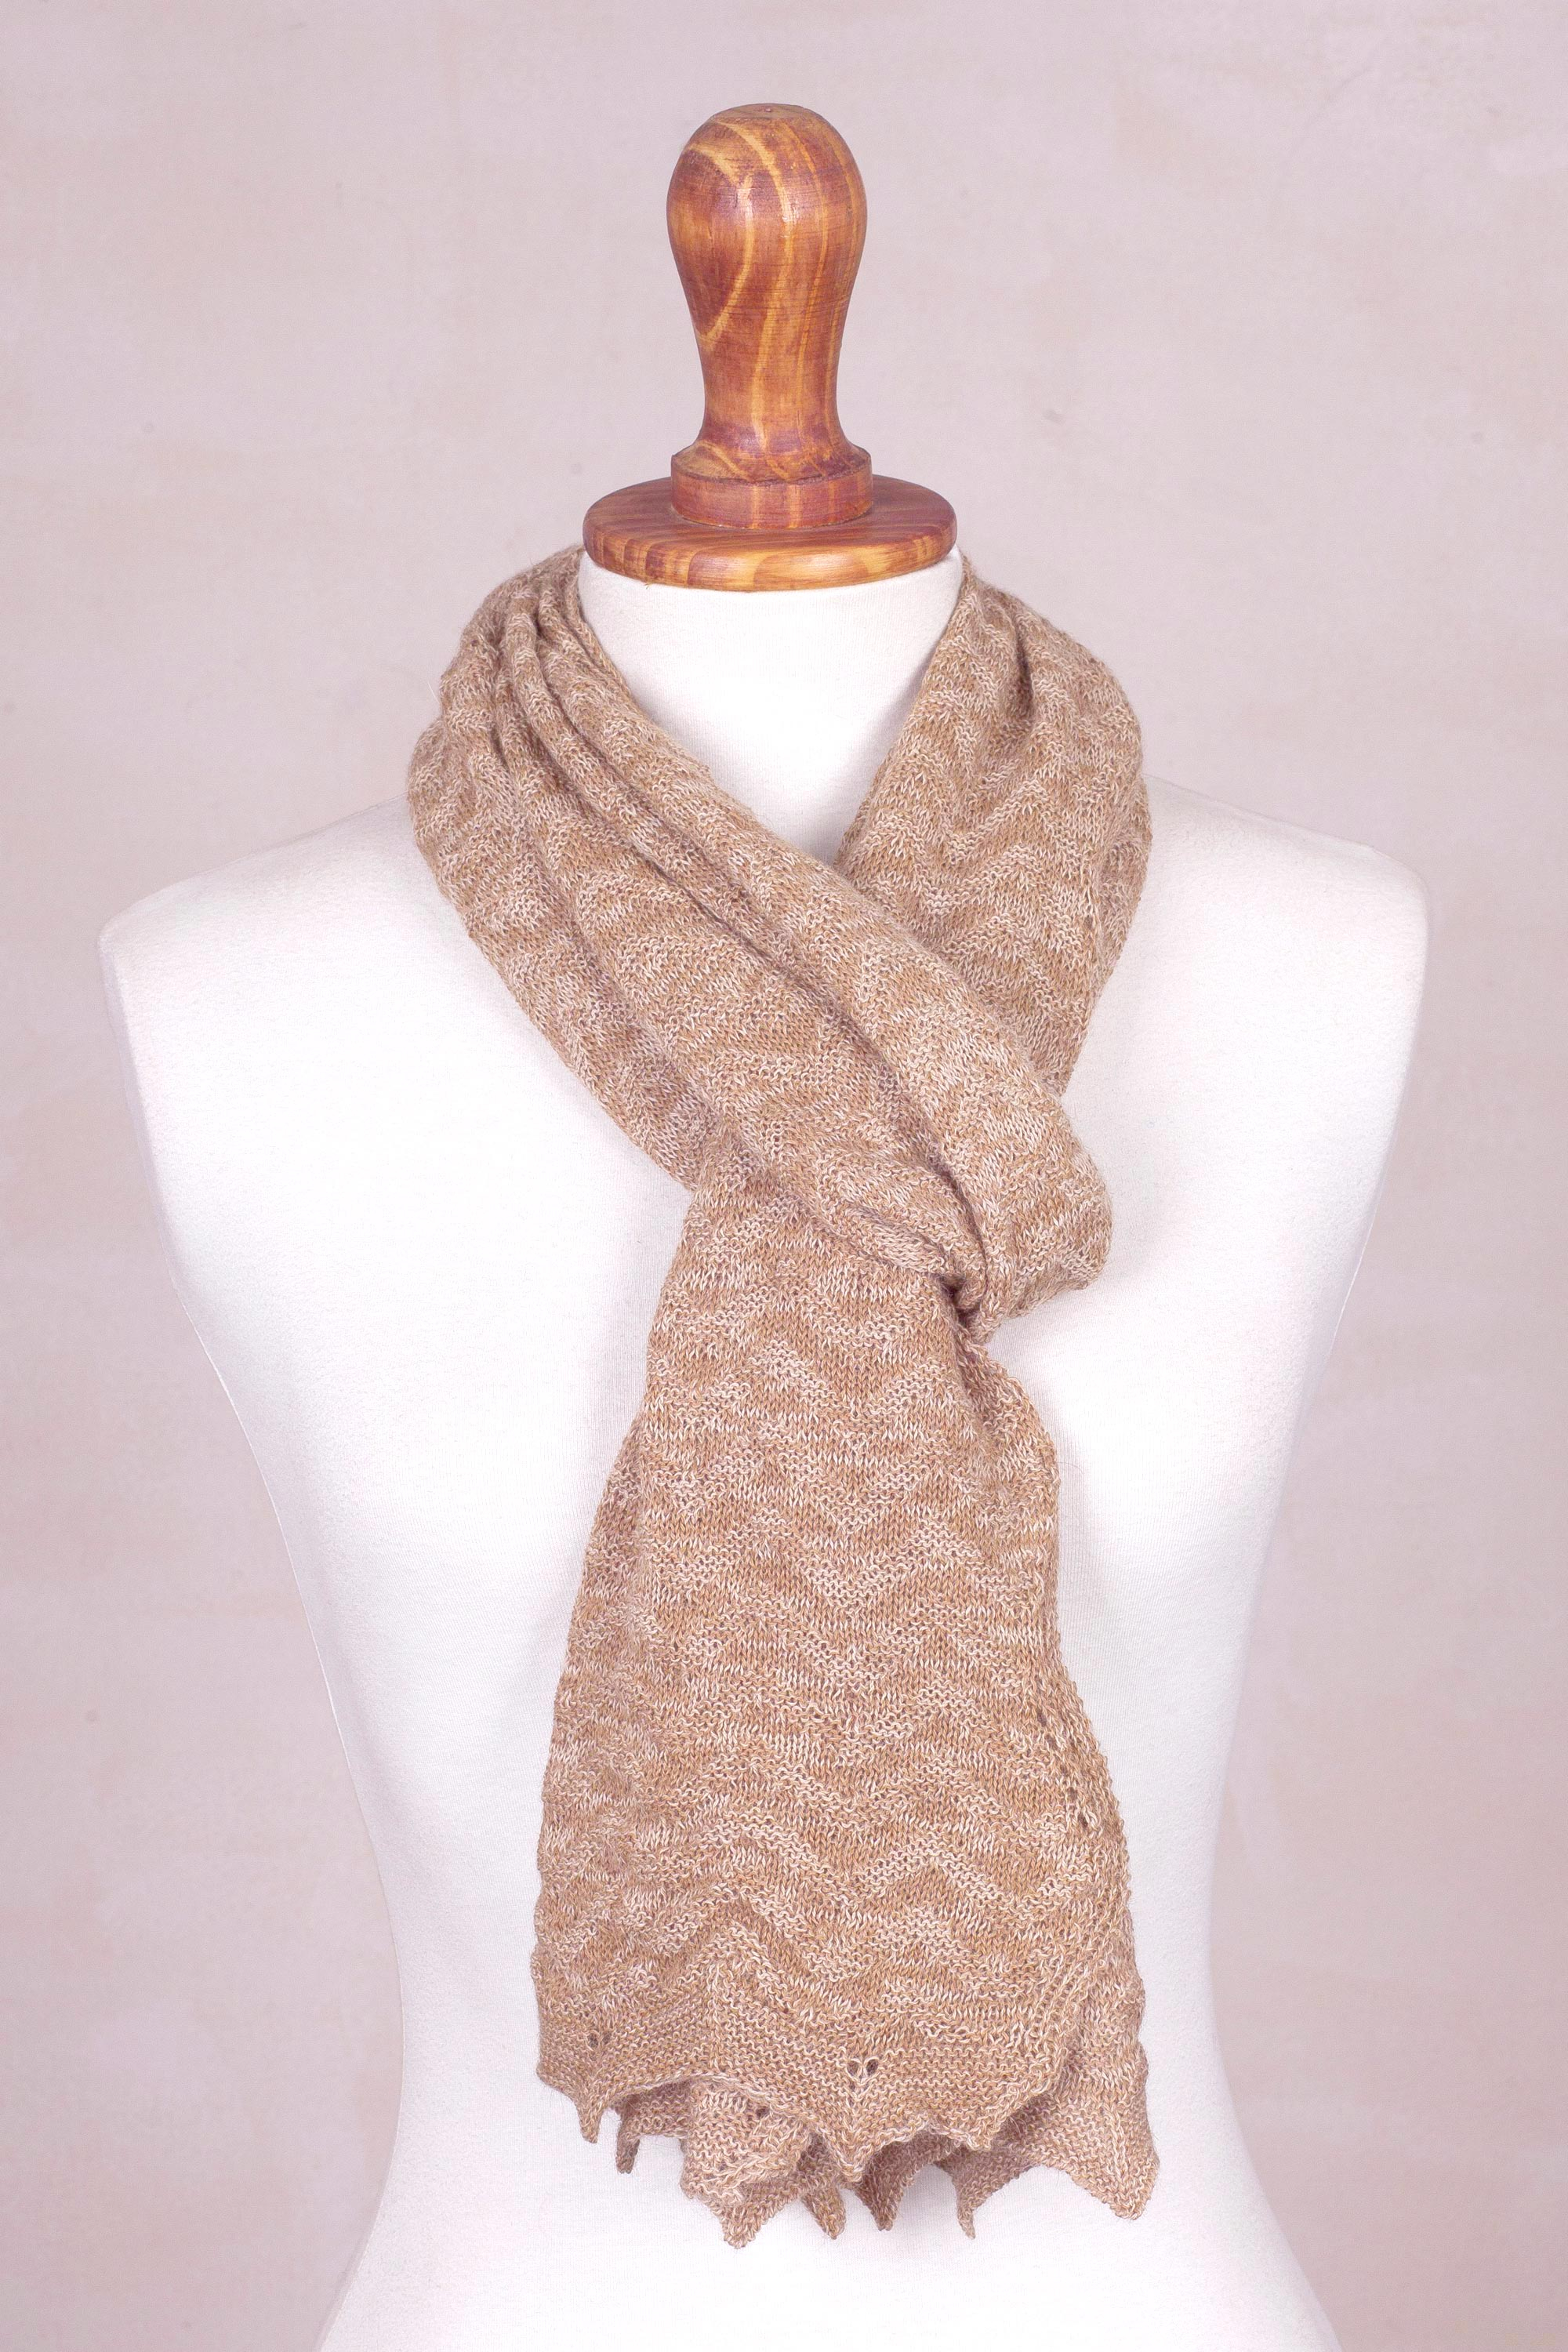 Knit 100% Alpaca Wrap Scarf in Ivory and Tan from Peru - Mountain Range ...